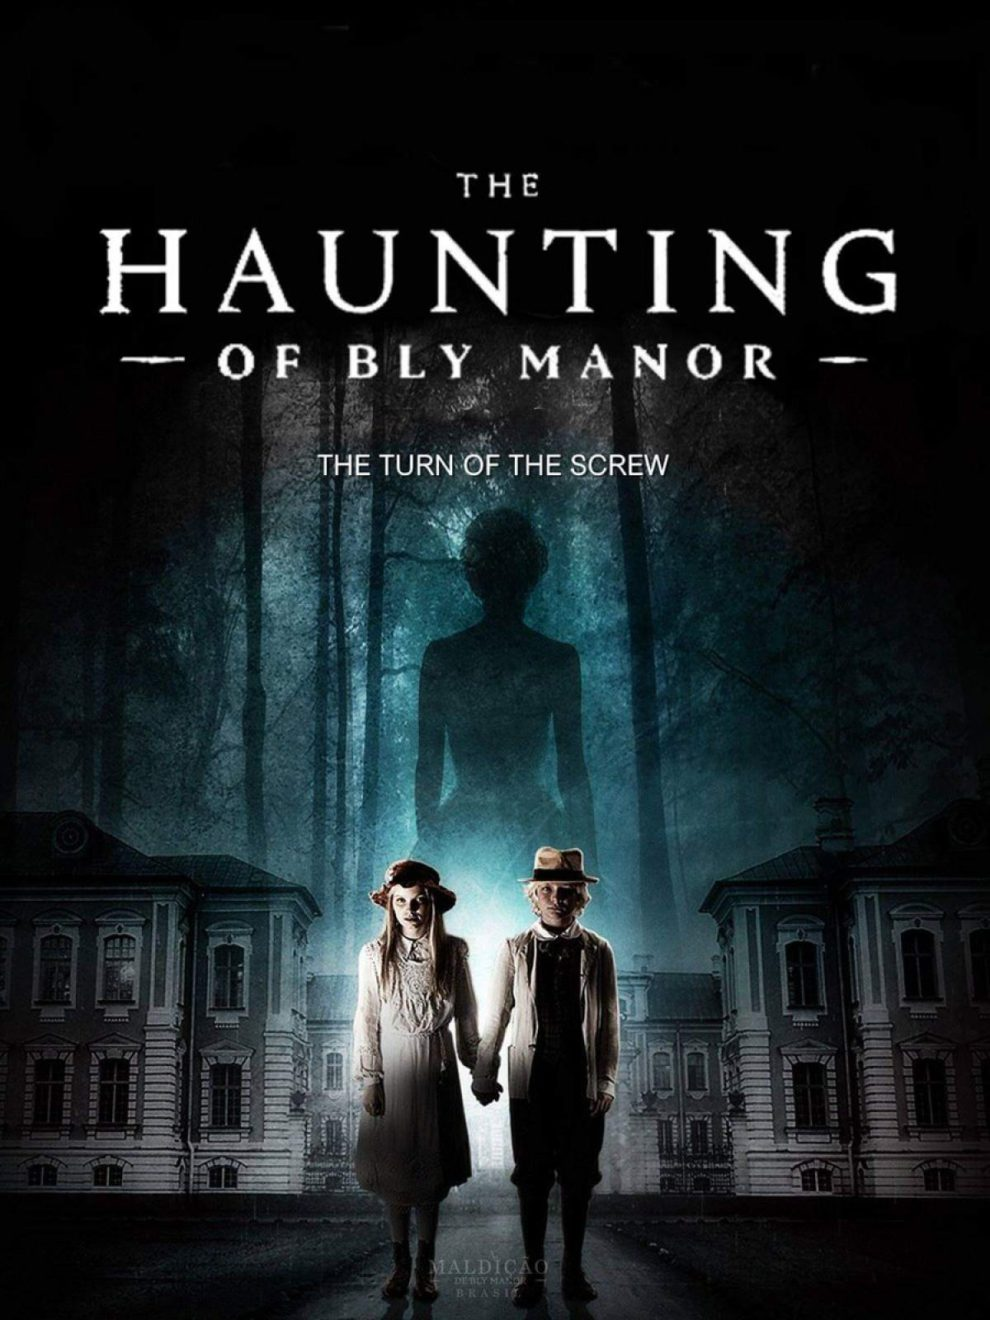 4. The Haunting of Bly Manor